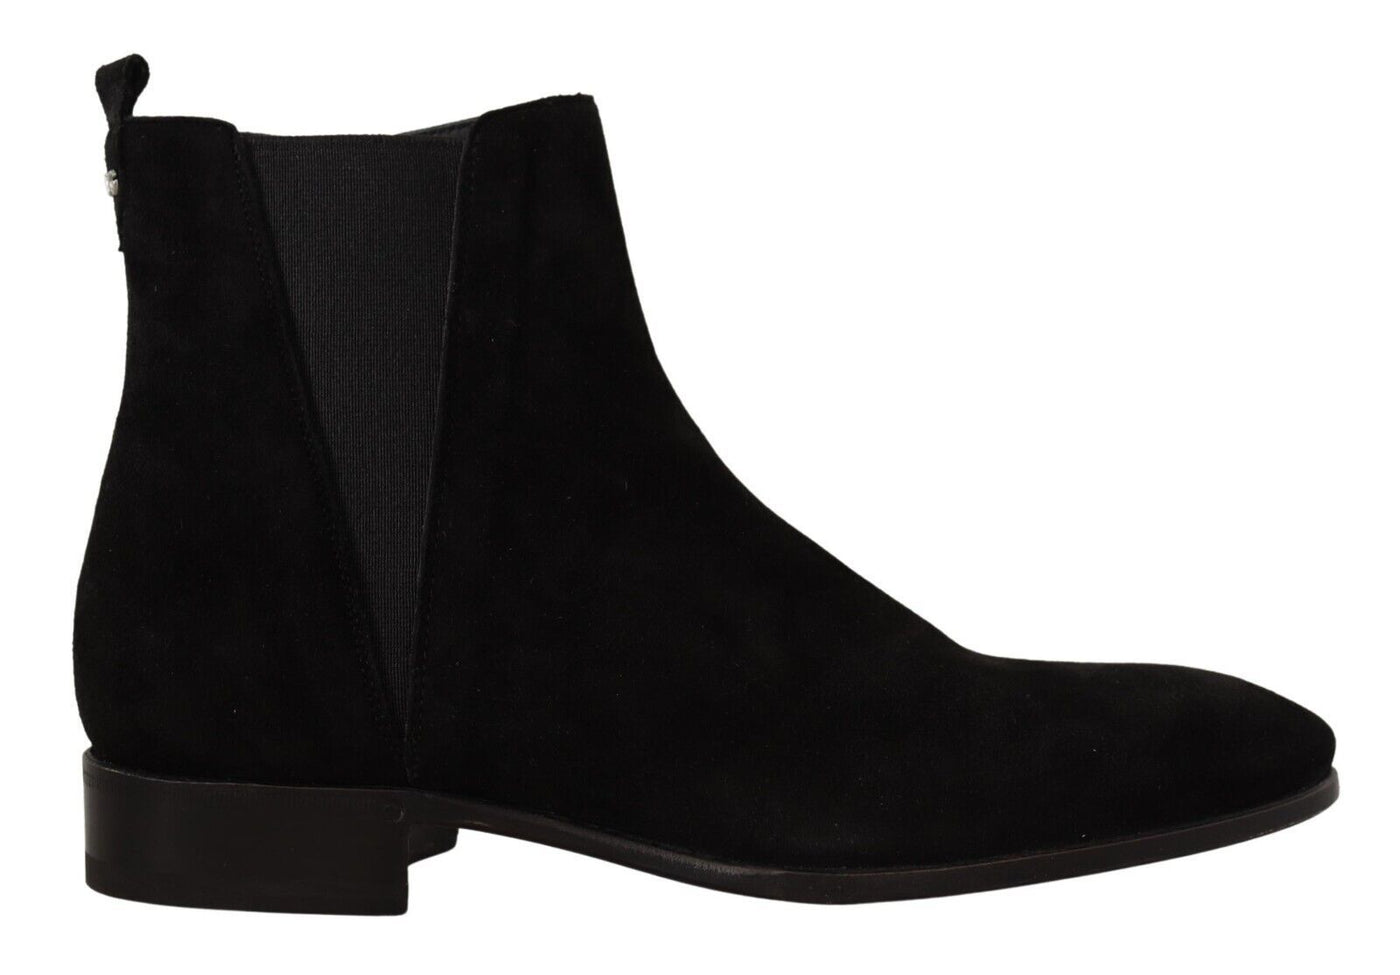 Dolce & Gabbana Black Suede Leather Chelsea Mens Boots Shoes